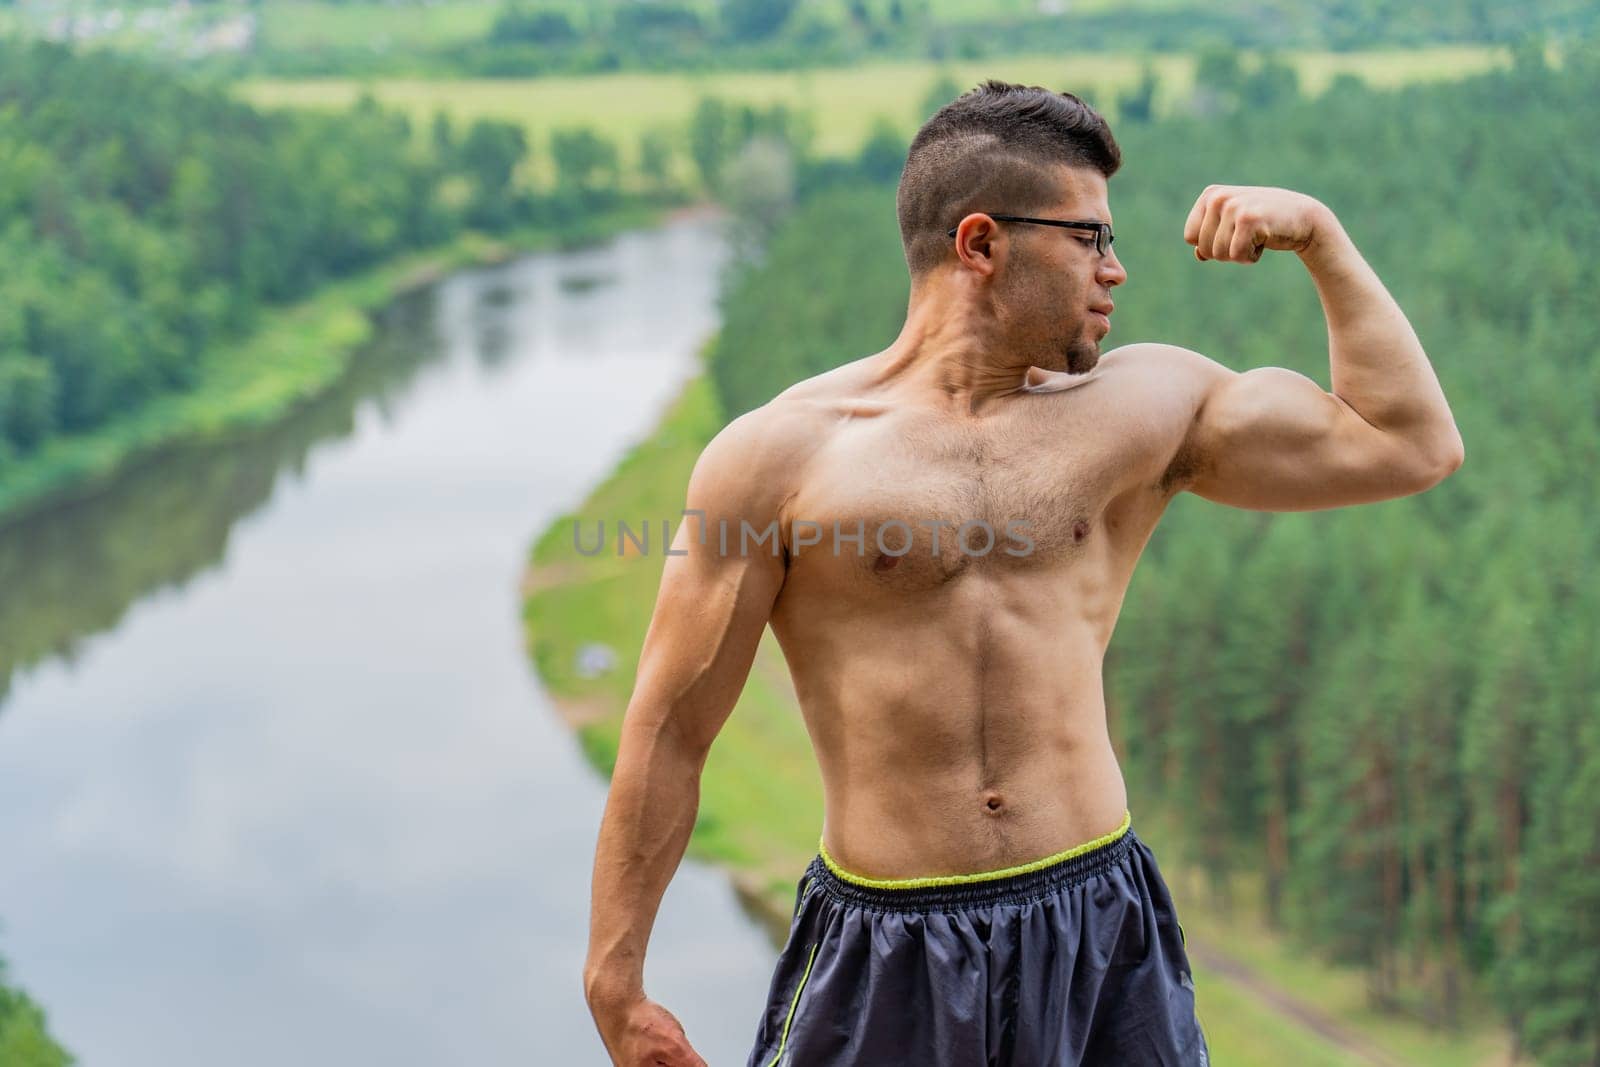 A young Jordanian guy demonstrates his muscles against the backdrop of beautiful nature